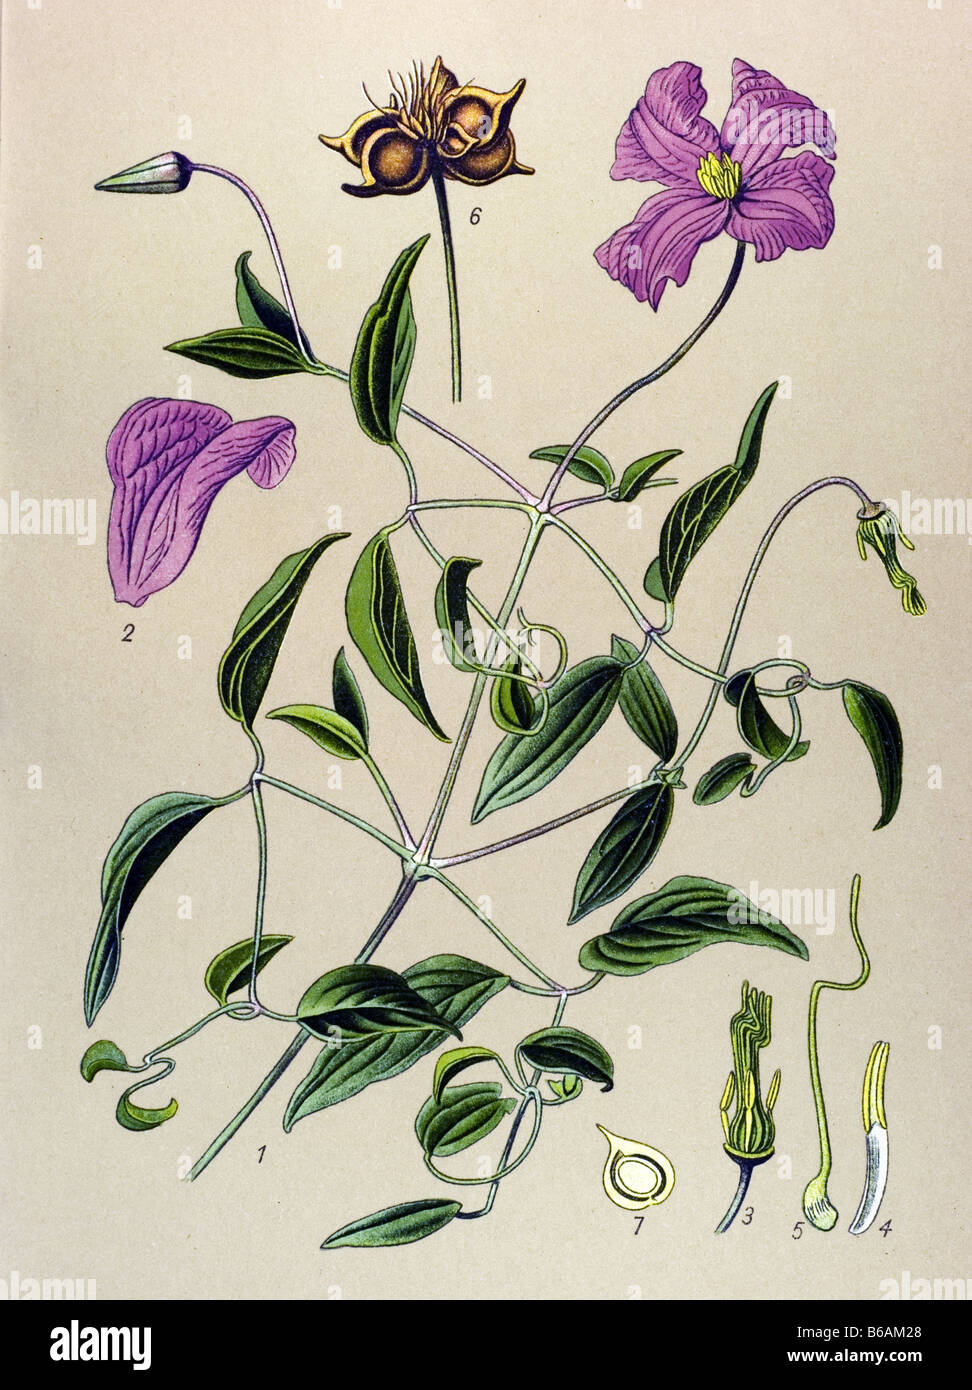 Italian Clematis, Clematis viticella poisonous plants illustrations Stock Photo